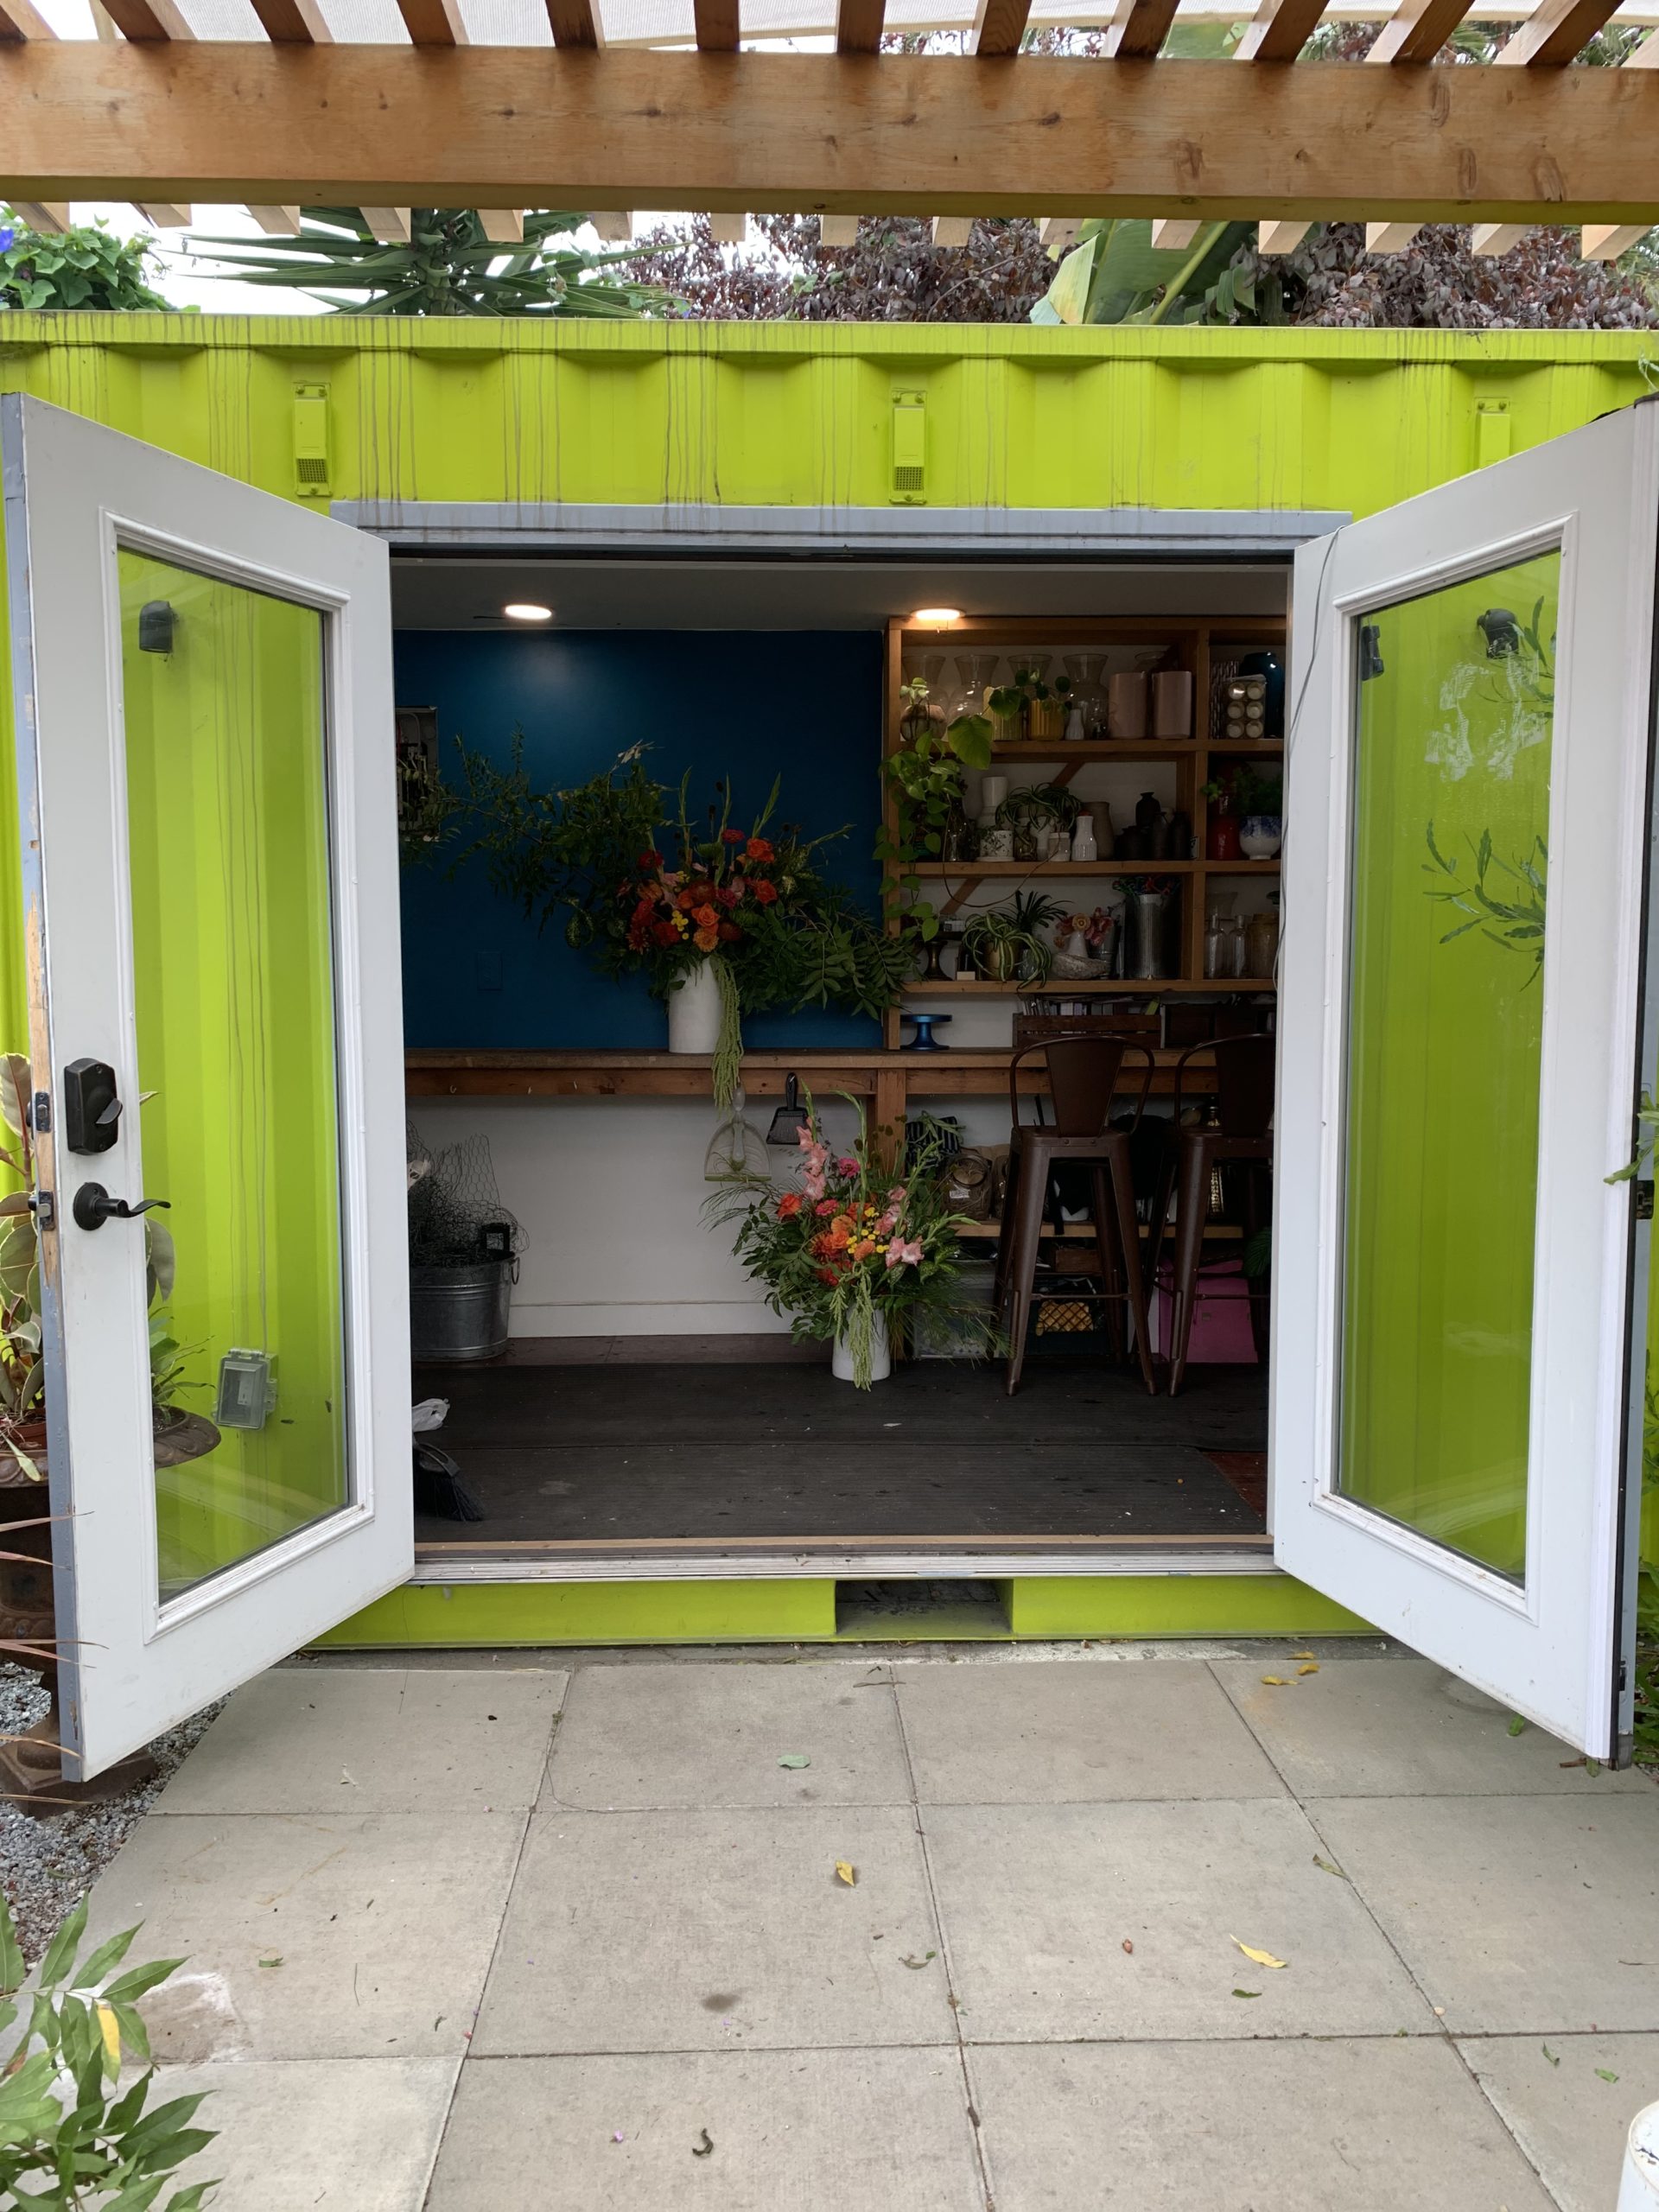 French doors opening into the flower shop